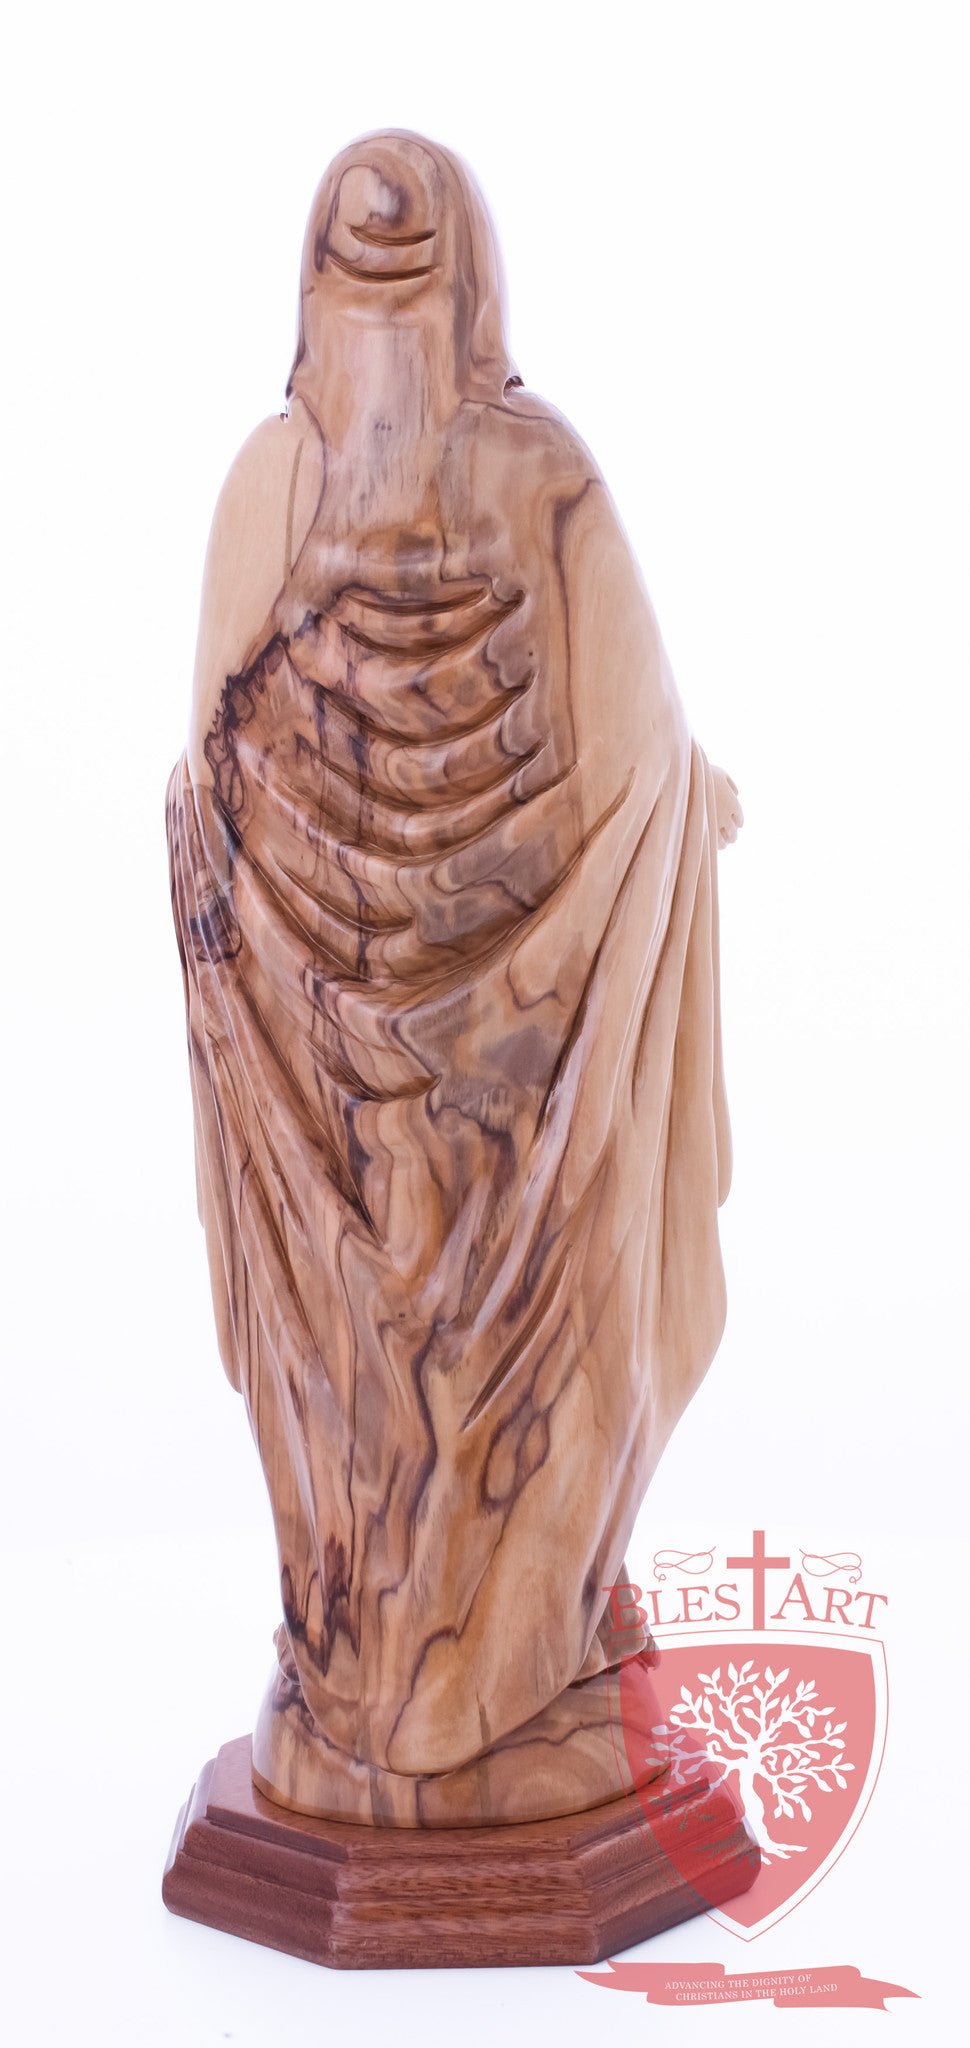 Blessed Mother Mary - Olive wood